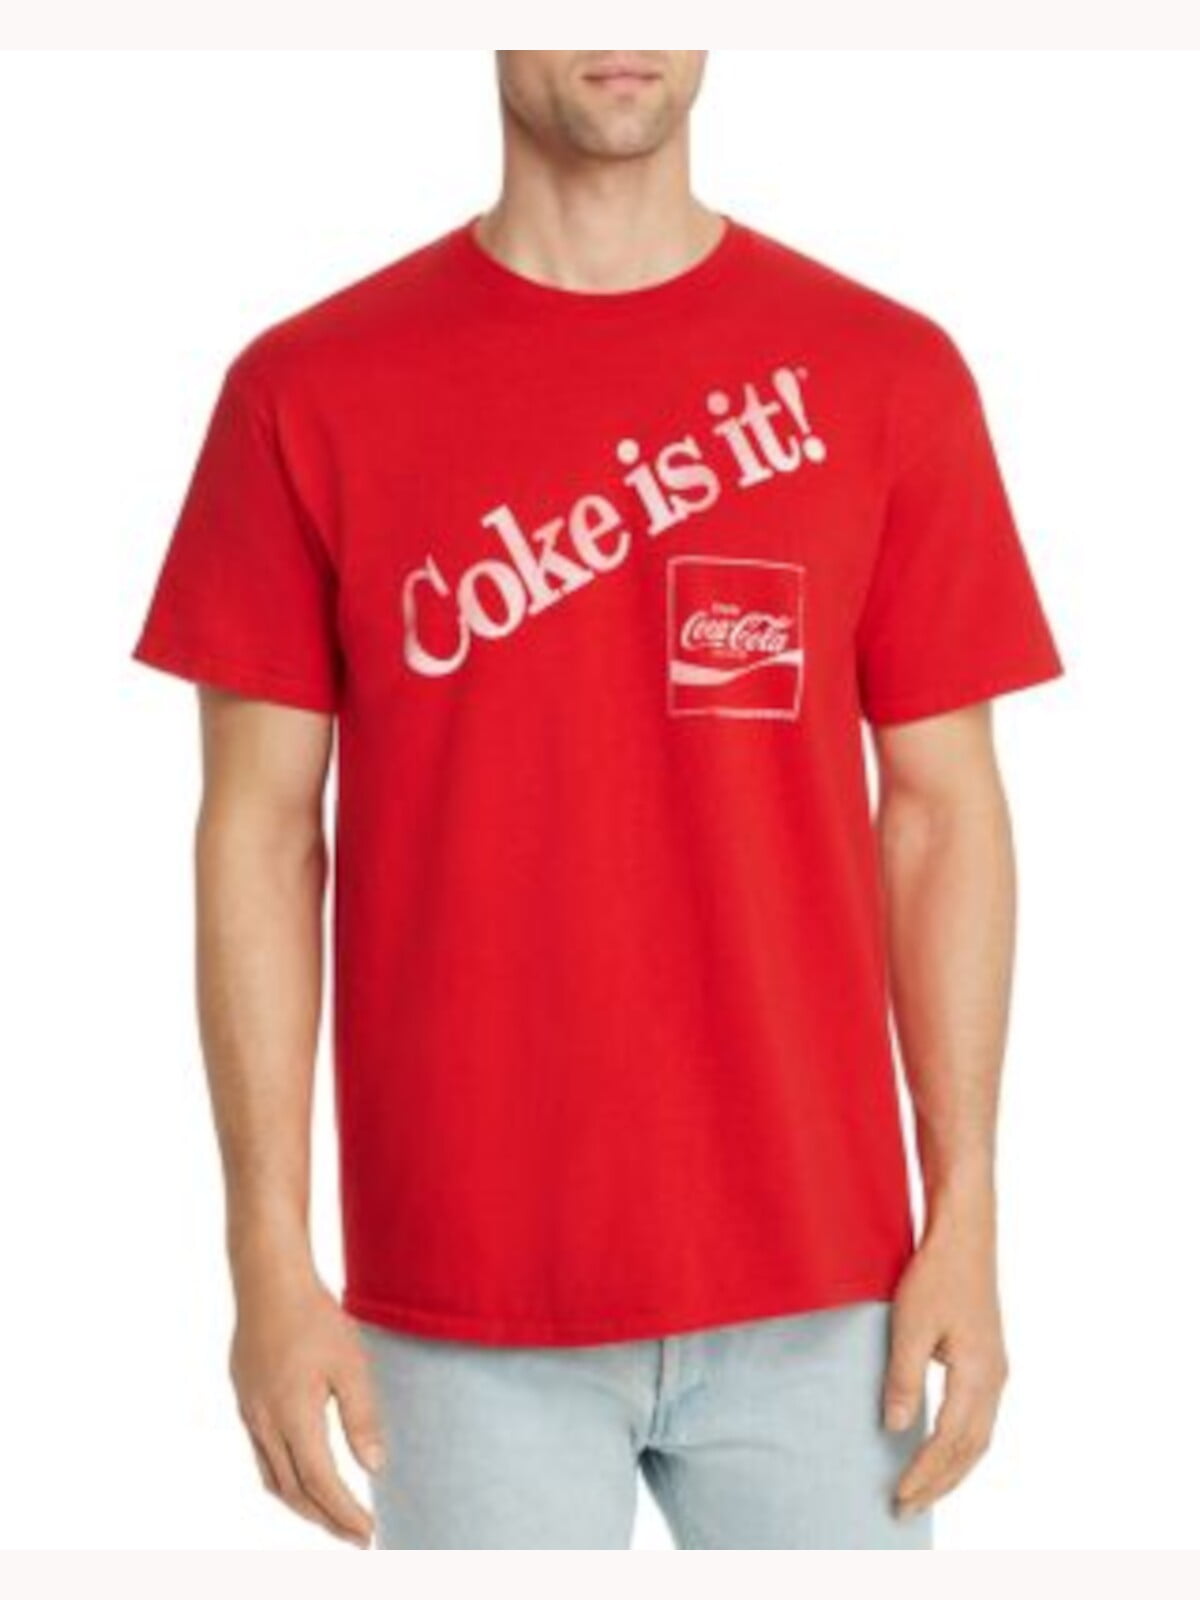 Coca-Cola Red T-shirt Tee Size 3XL 3X-Large Coke It's the Real Thing 100% Cotton 